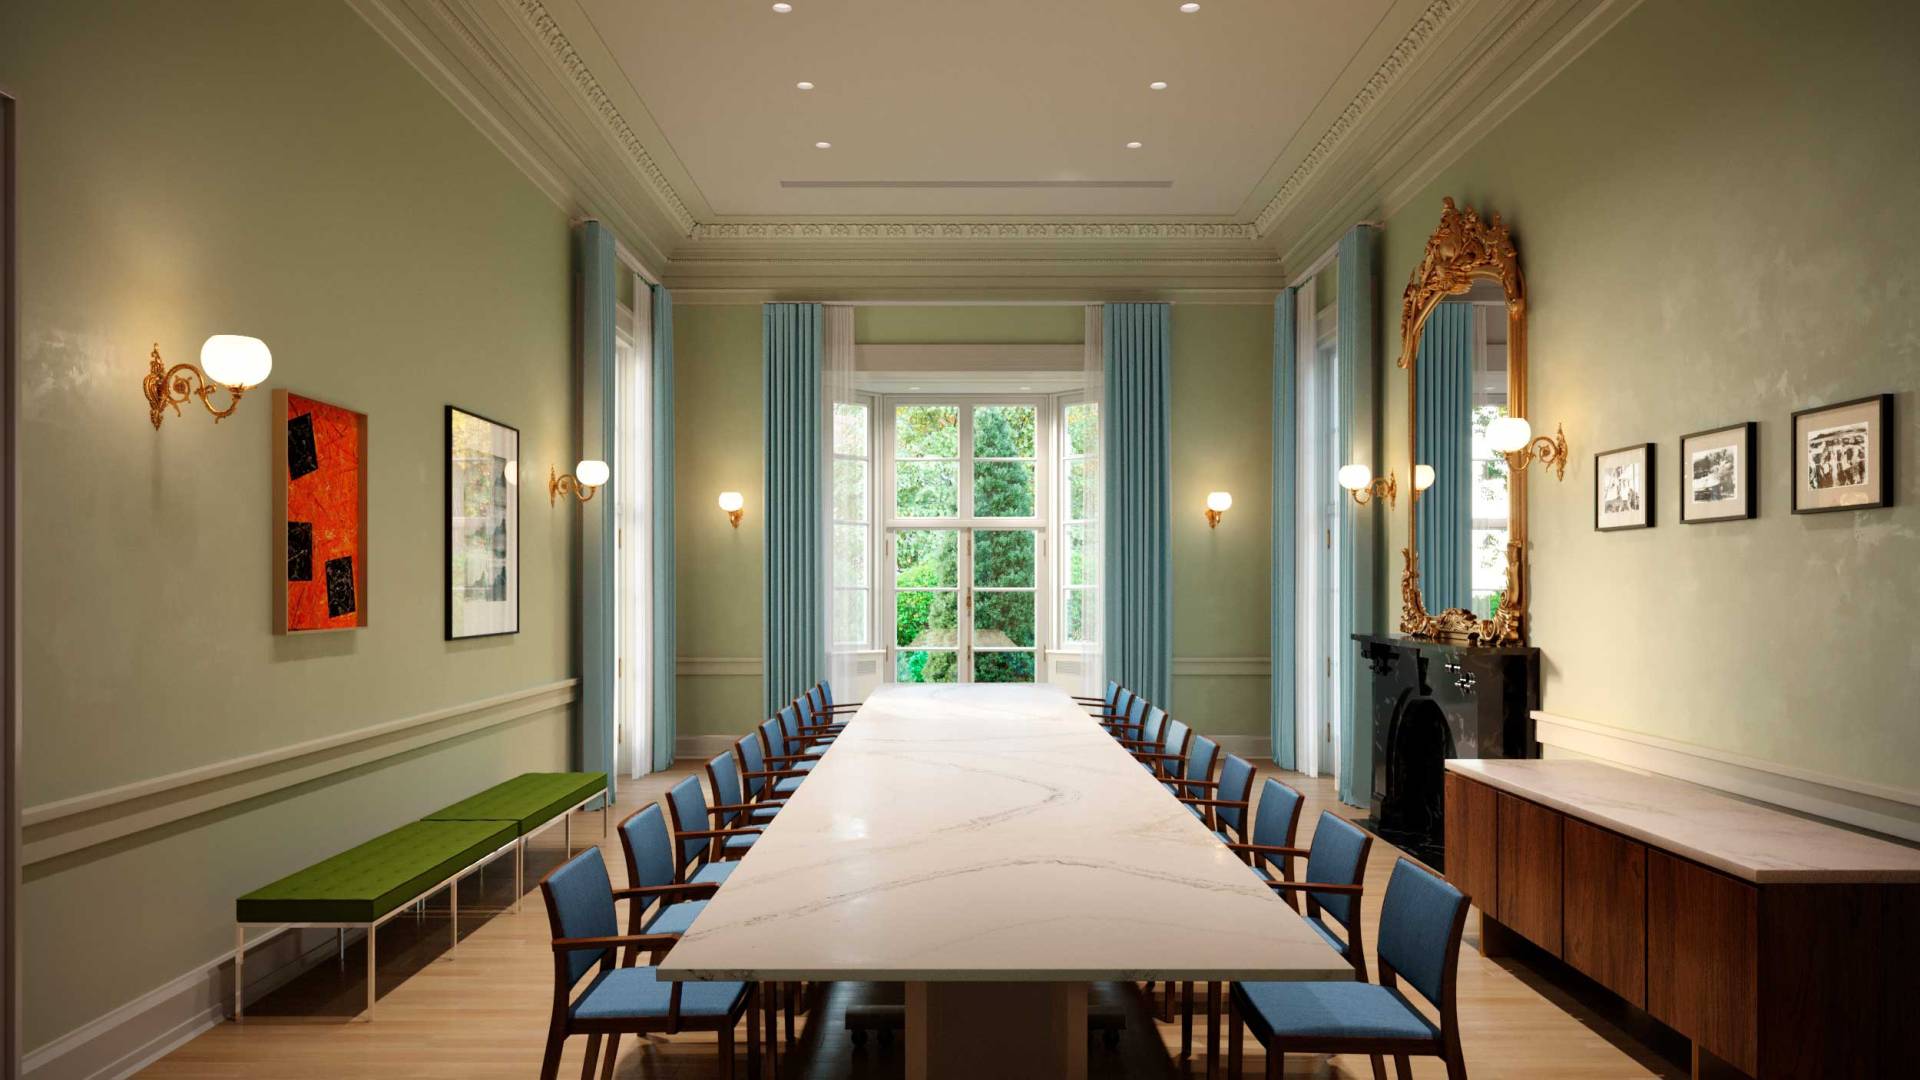 rendering of a conference room